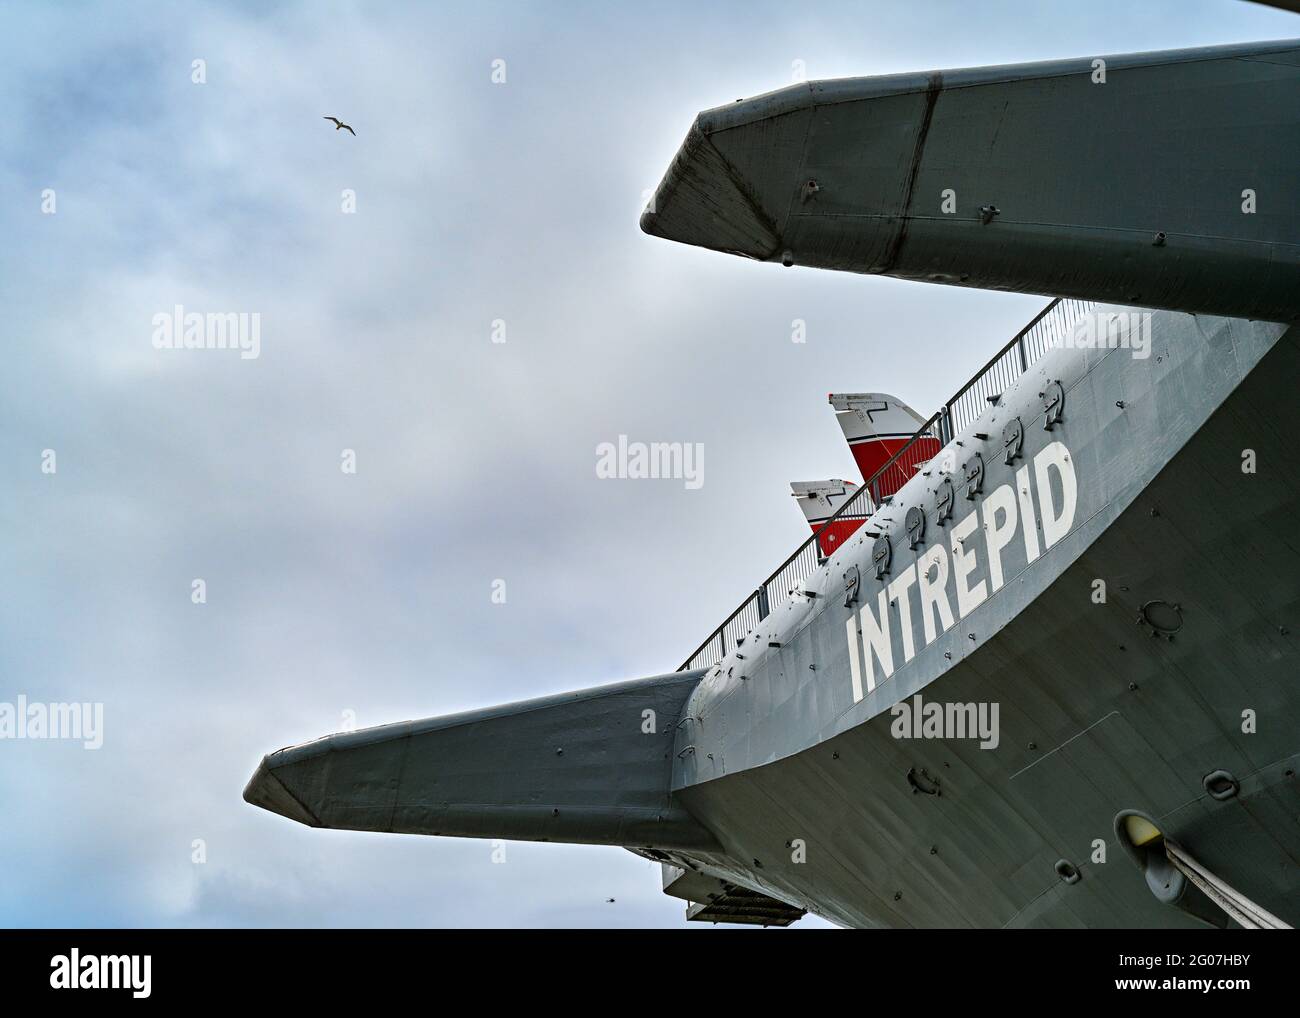 The Intrepid Sea, Air & Space Museum in New York. 31 May 2021 Stock Photo